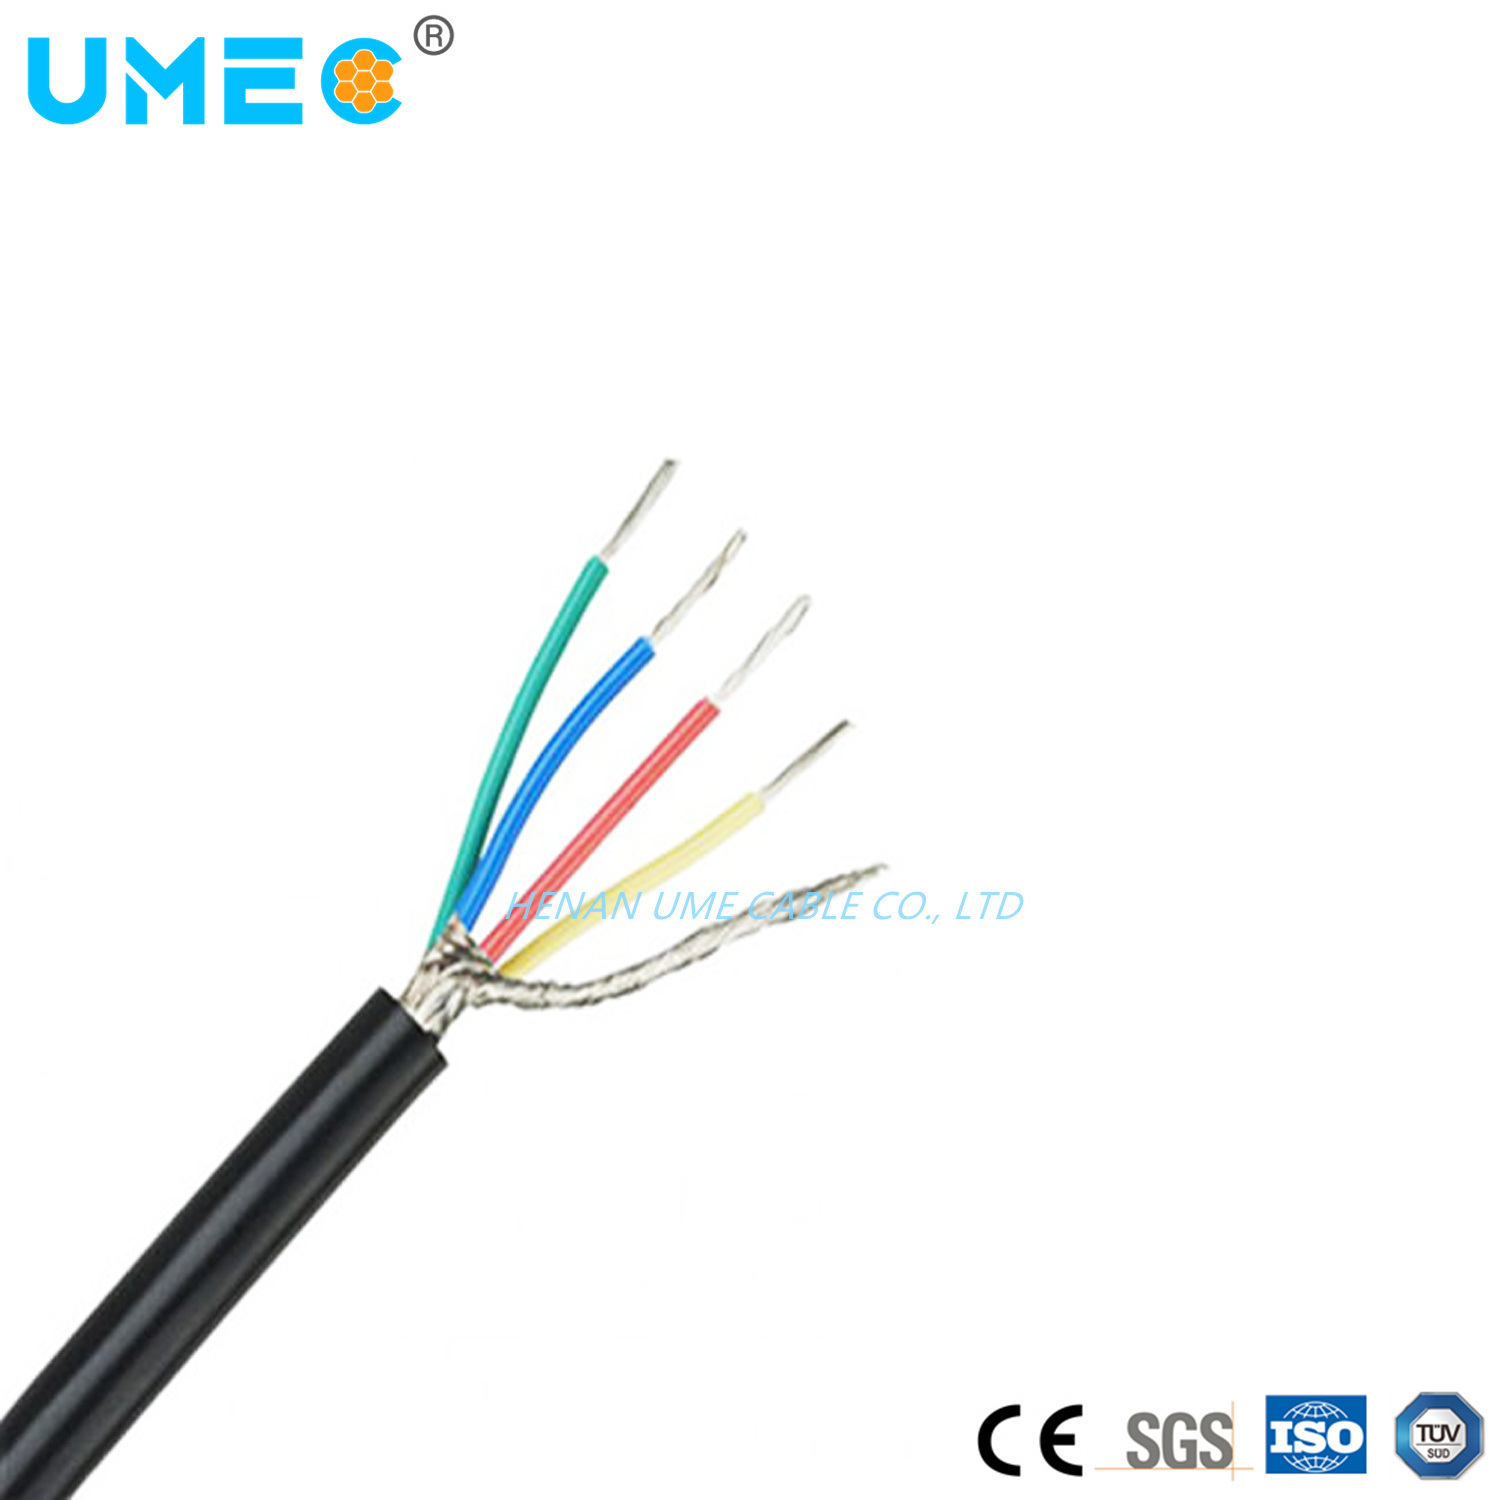 Electrical Cable for Computers PE/PVC Insulation PE Insulation PVC Sheath Soft Computer Cable